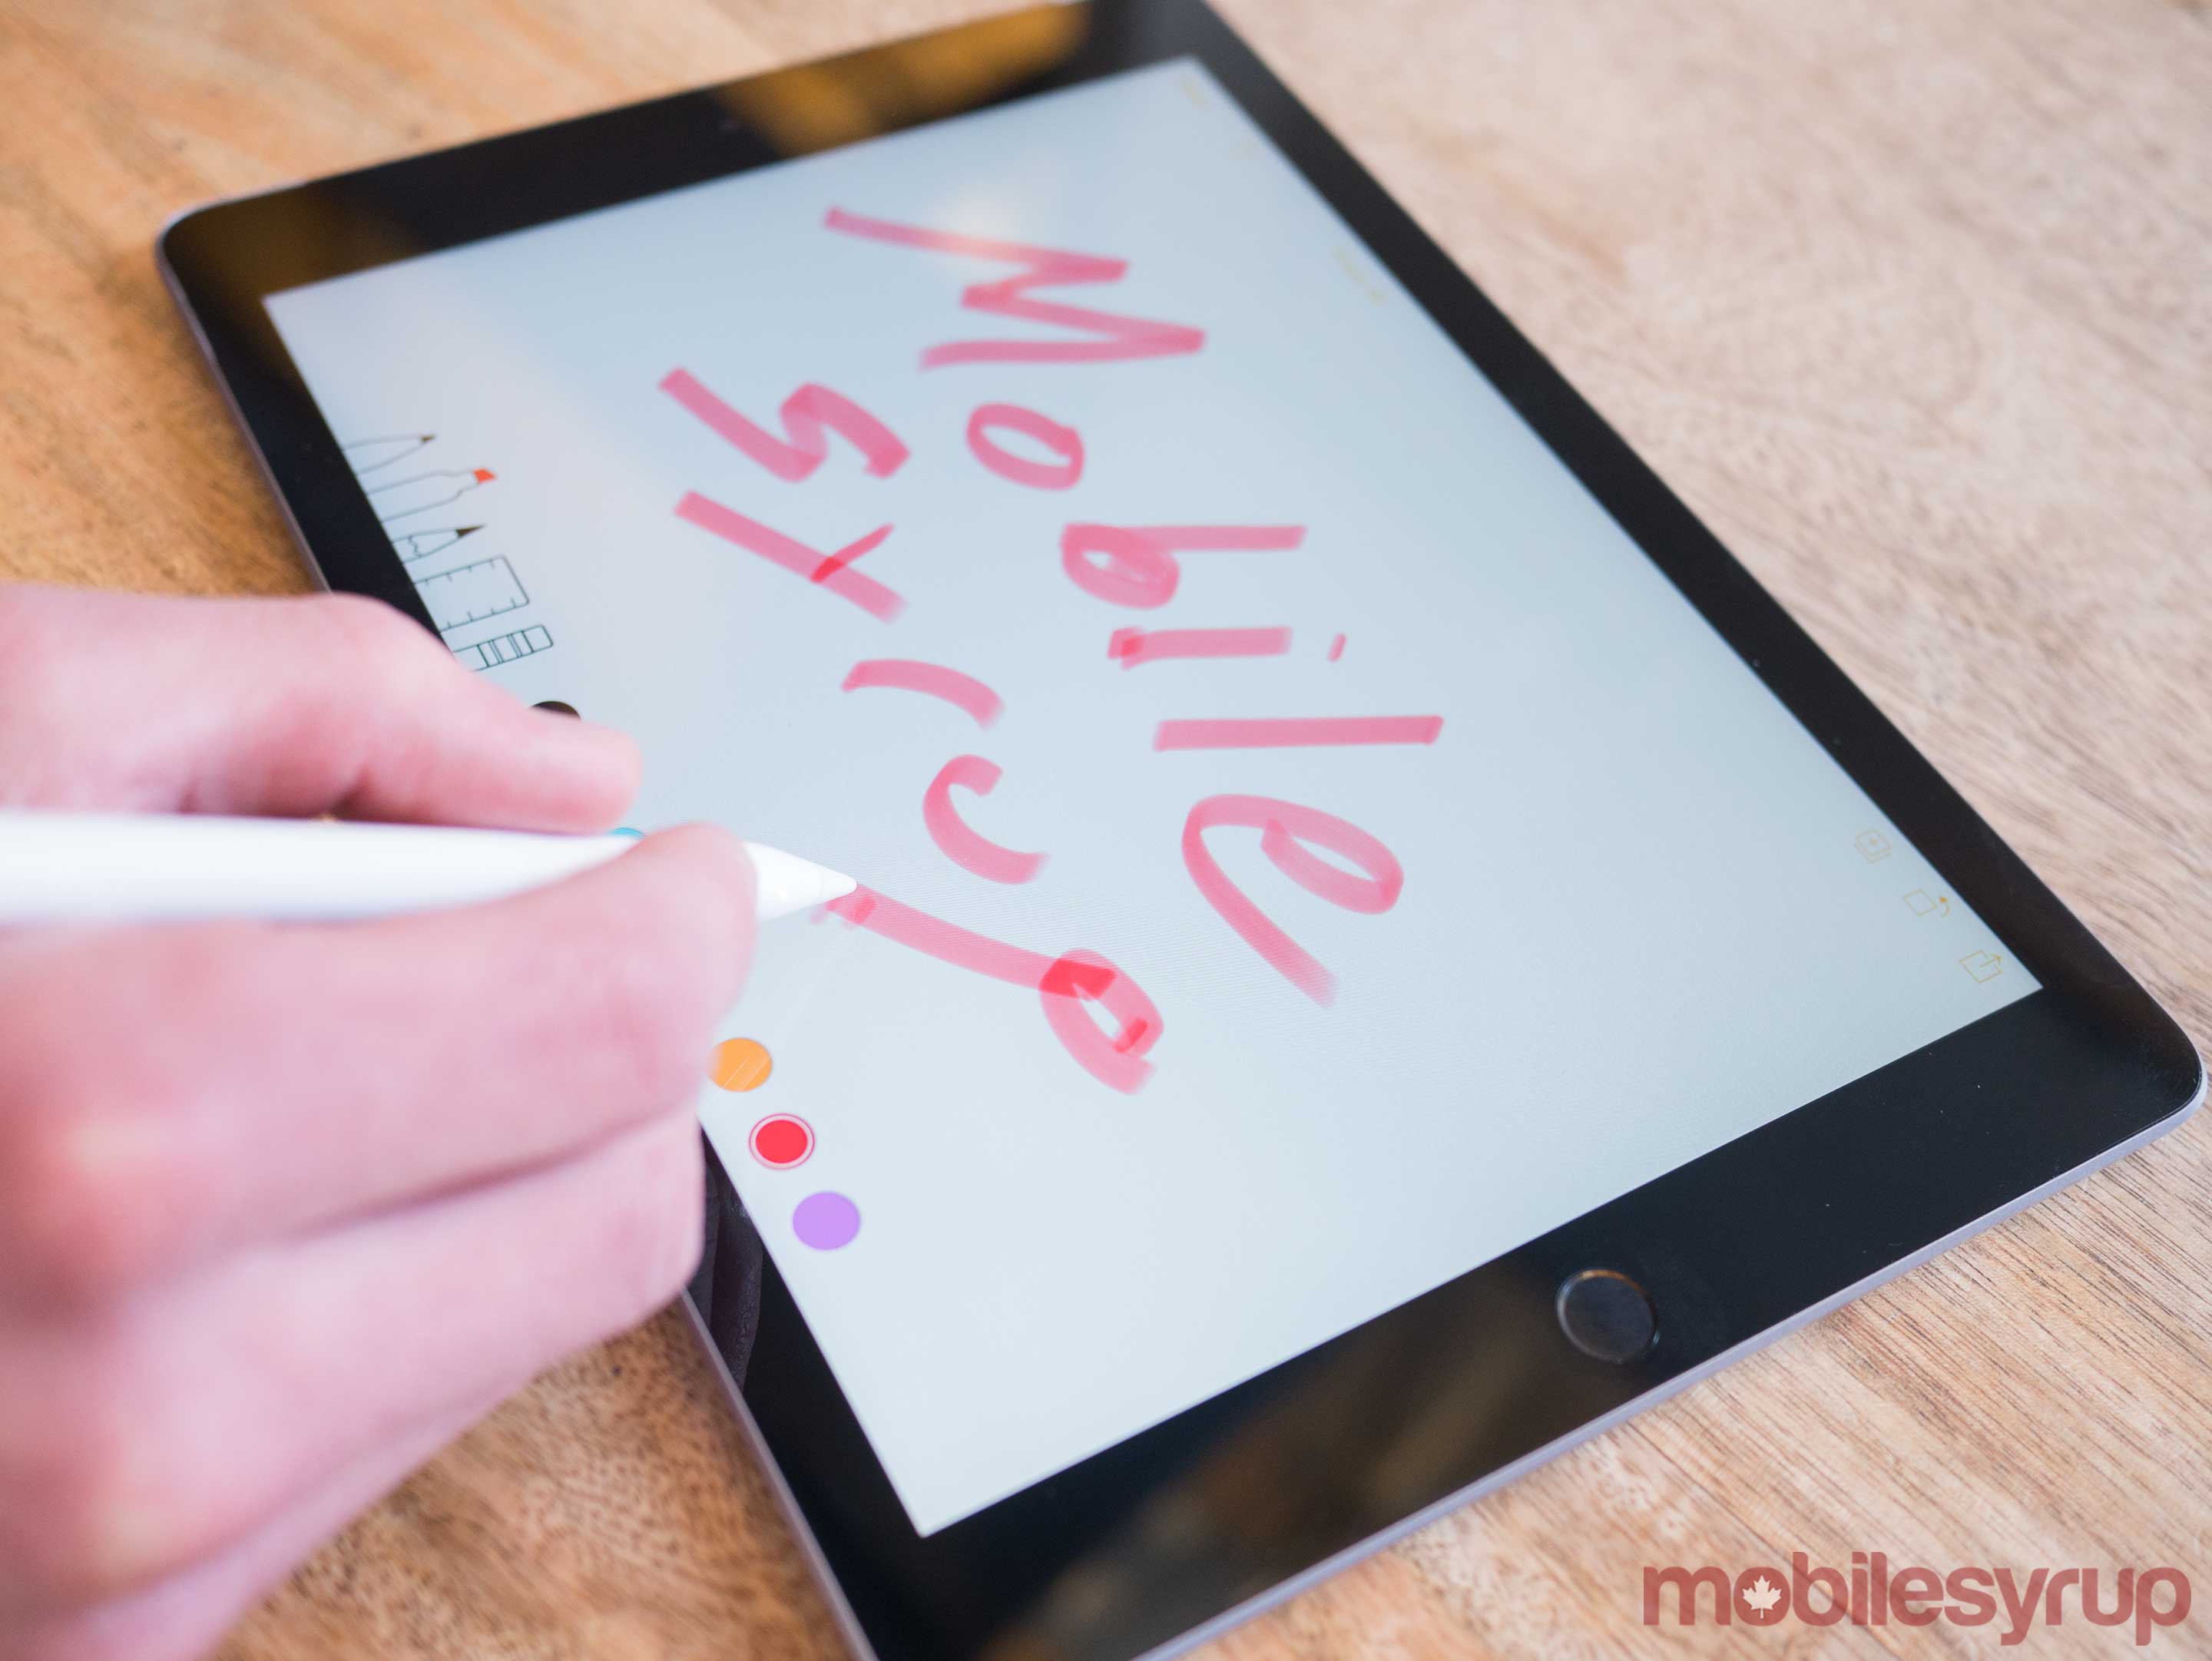 9.7-inch iPad writing MobileSyrup with Apple Pencil